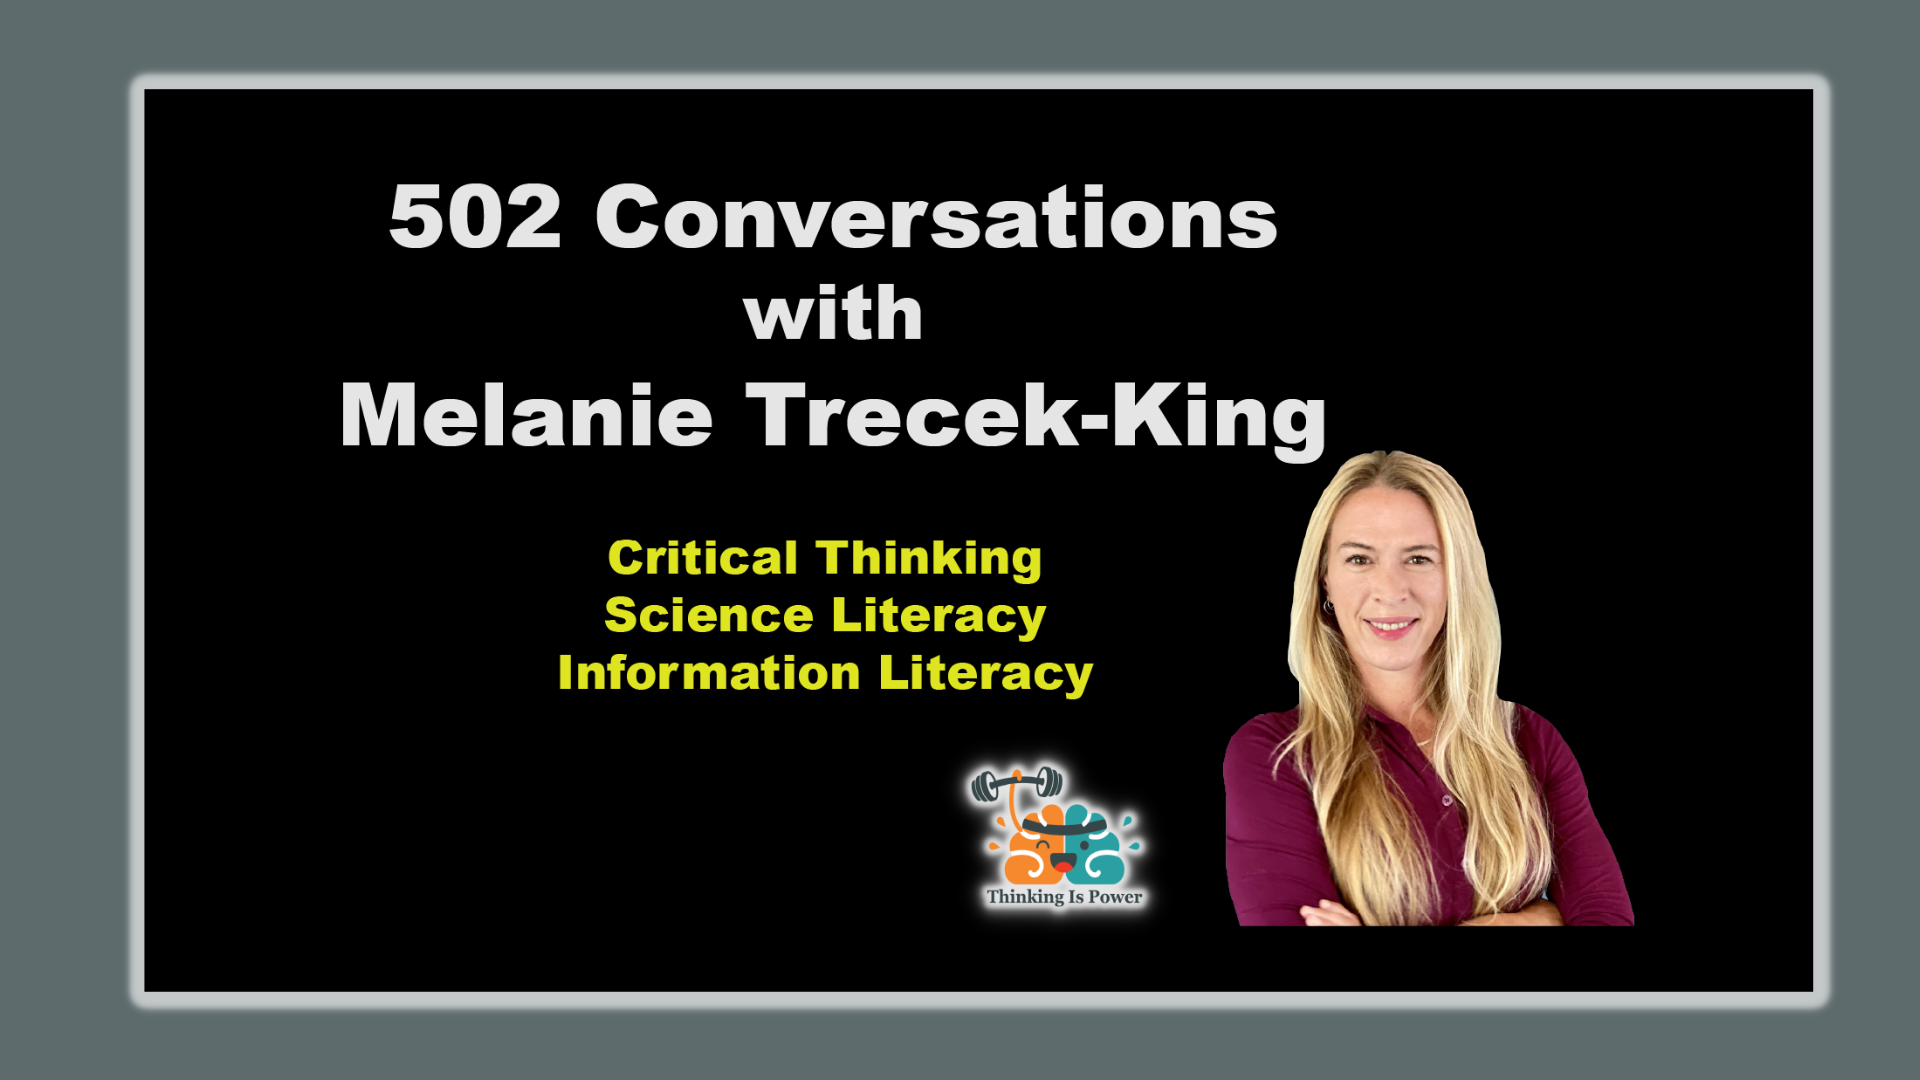 Thinking Is Power on 502 Conversations